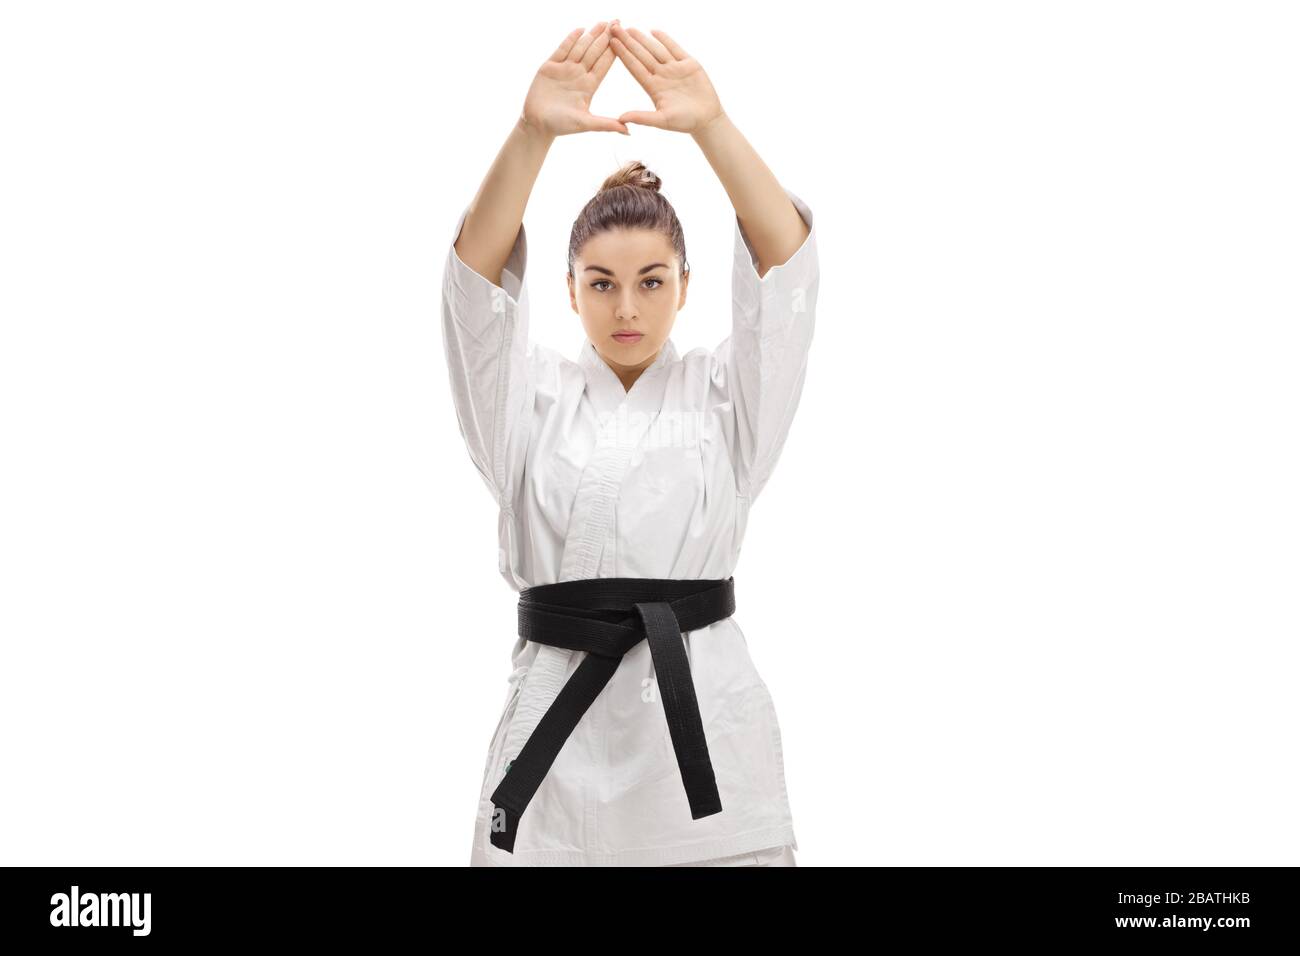 Woman practicing karate isolated on white background Stock Photo